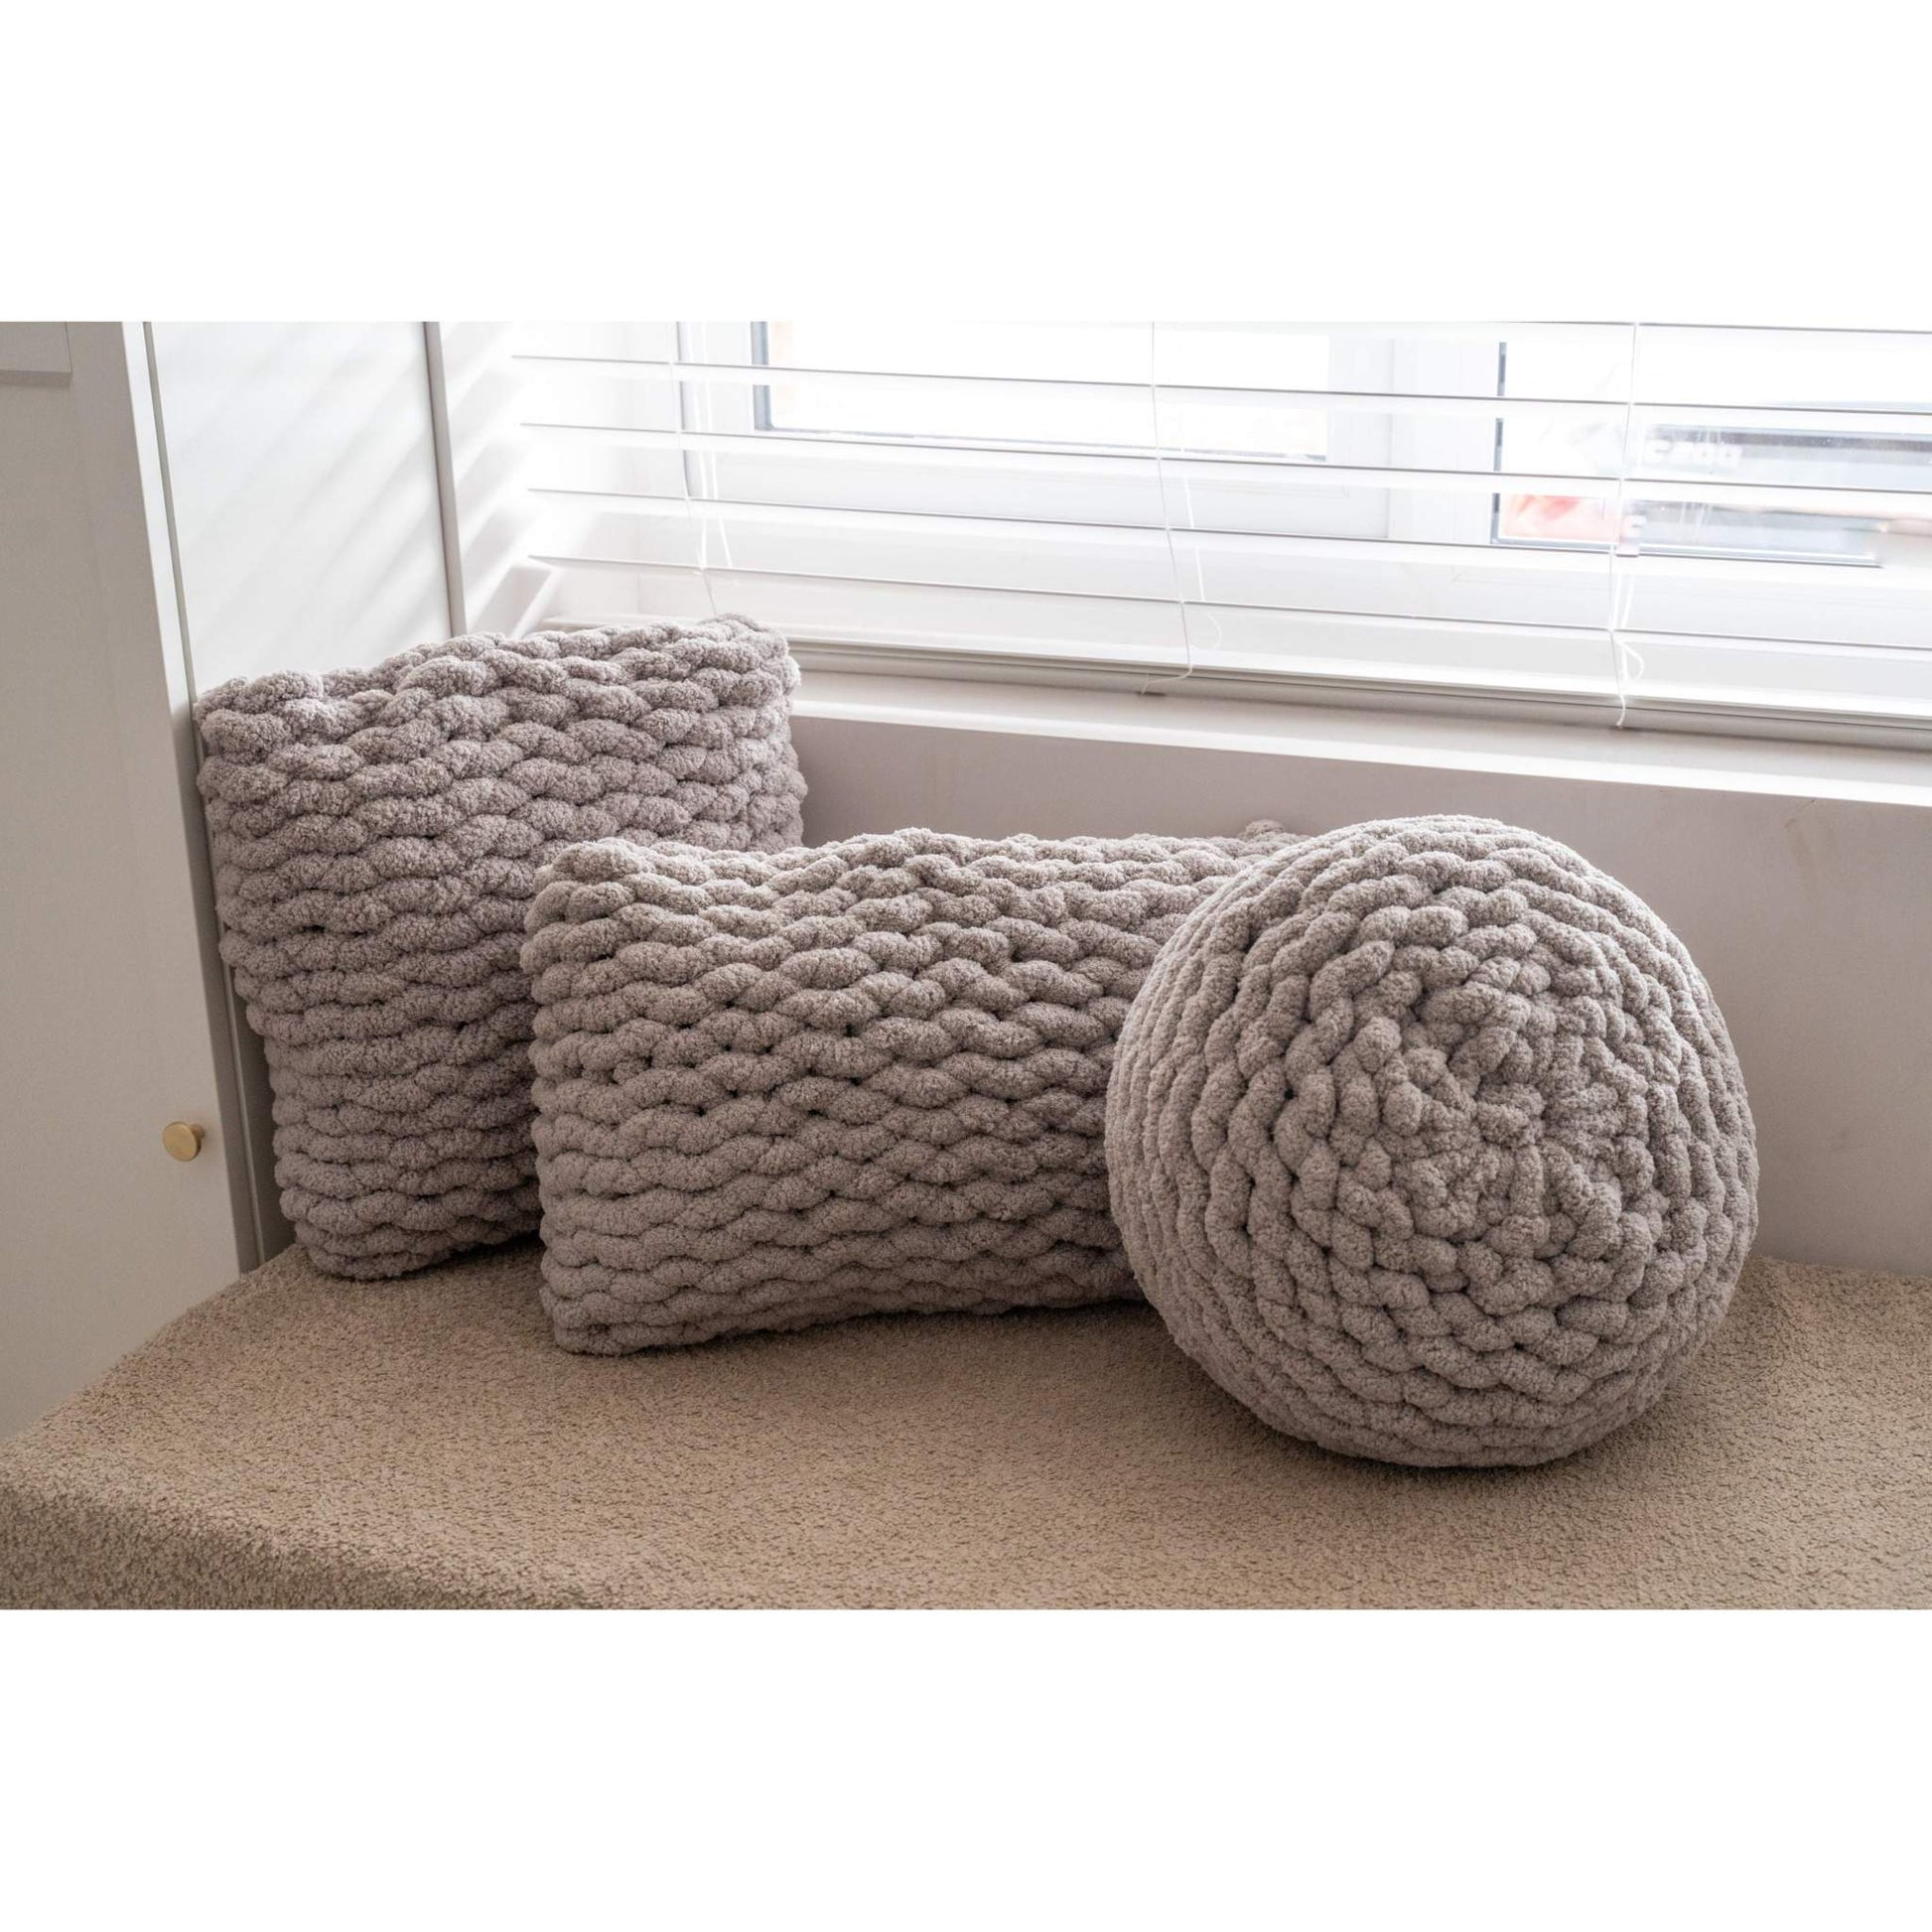 trio of hand knit cushions in grey taupe